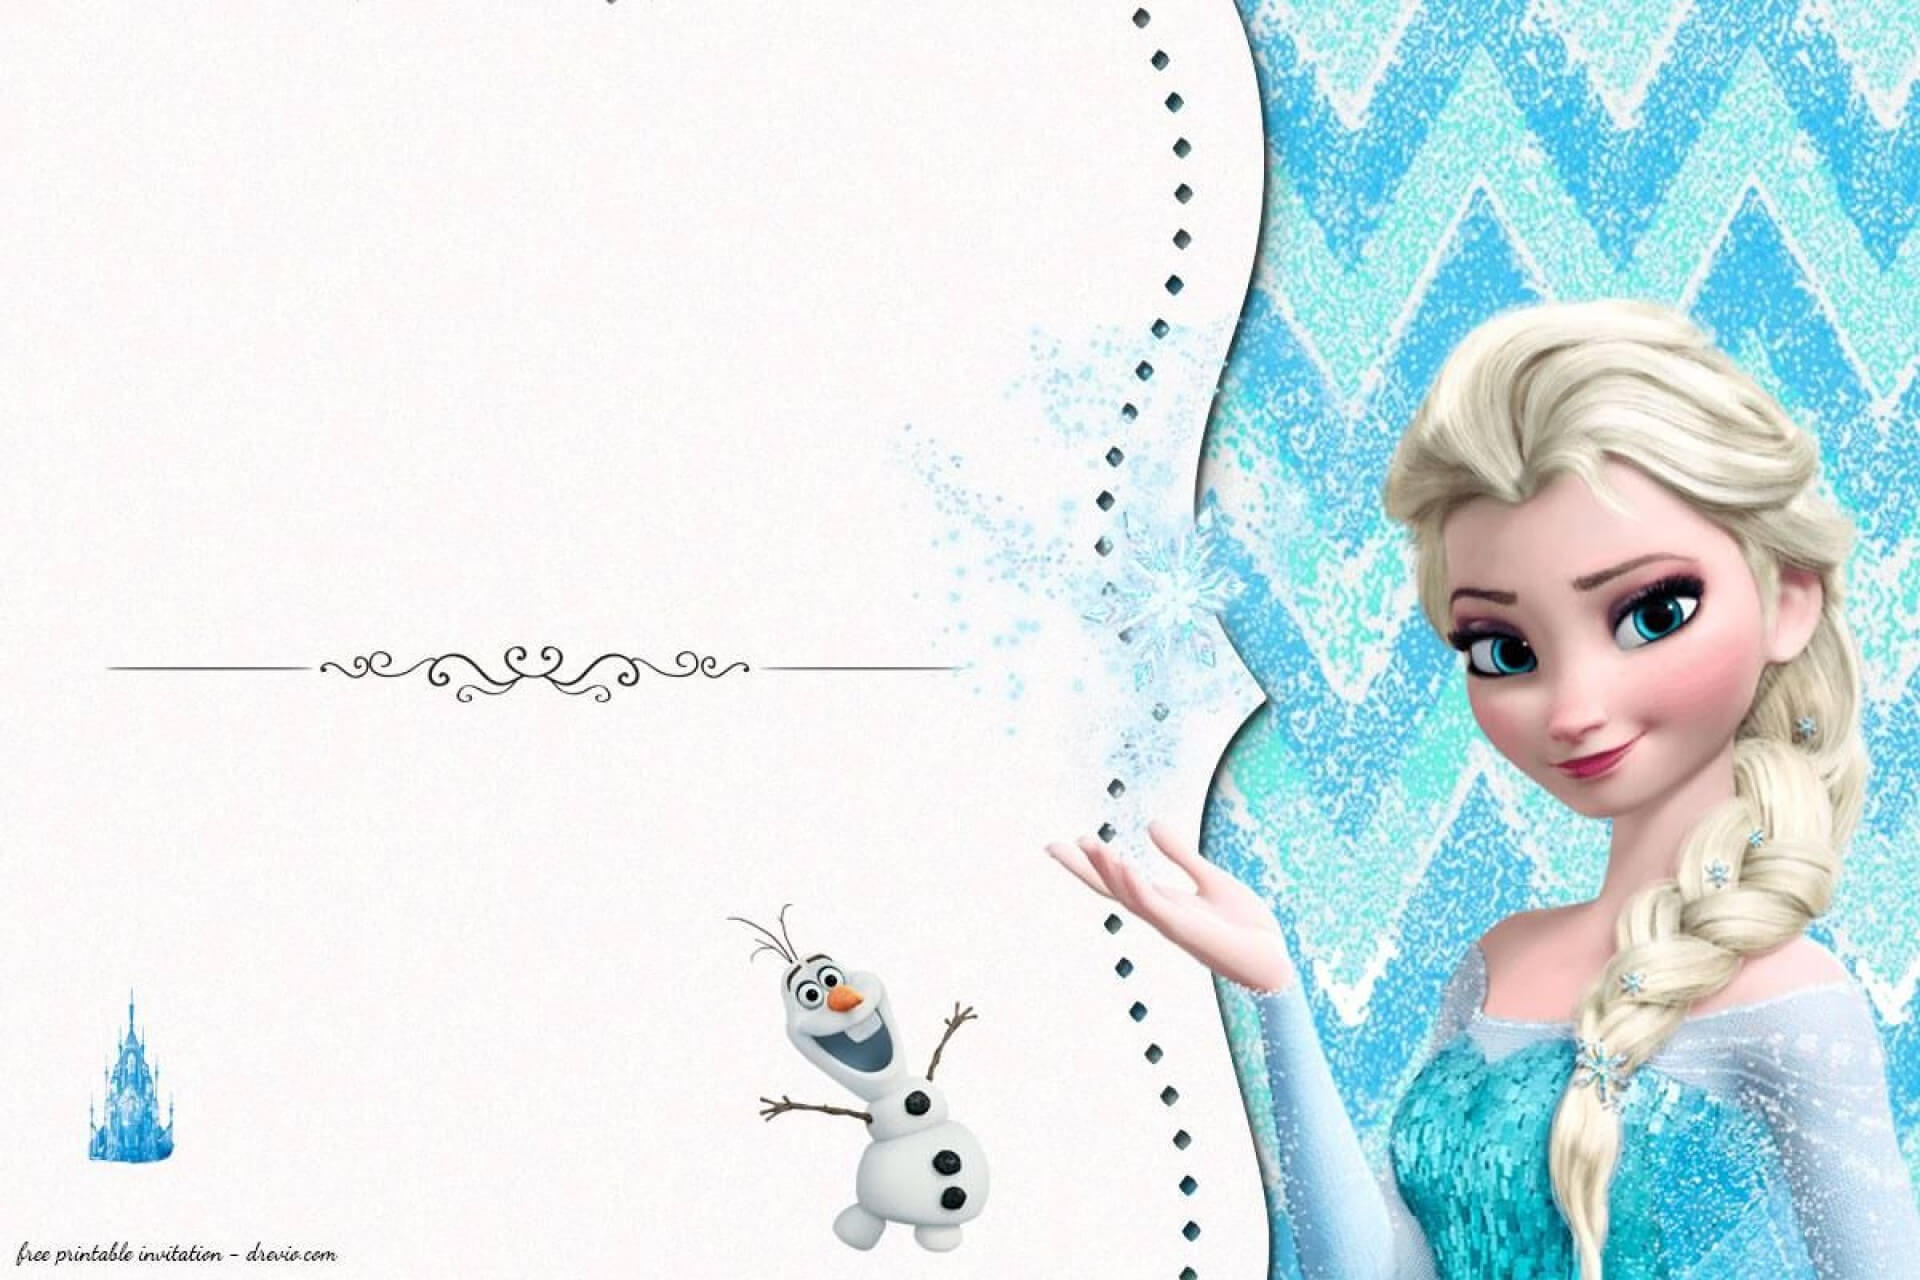 029-frozen-birthday-card-template-thank-you-printable-note-inside-frozen-birthday-card-template